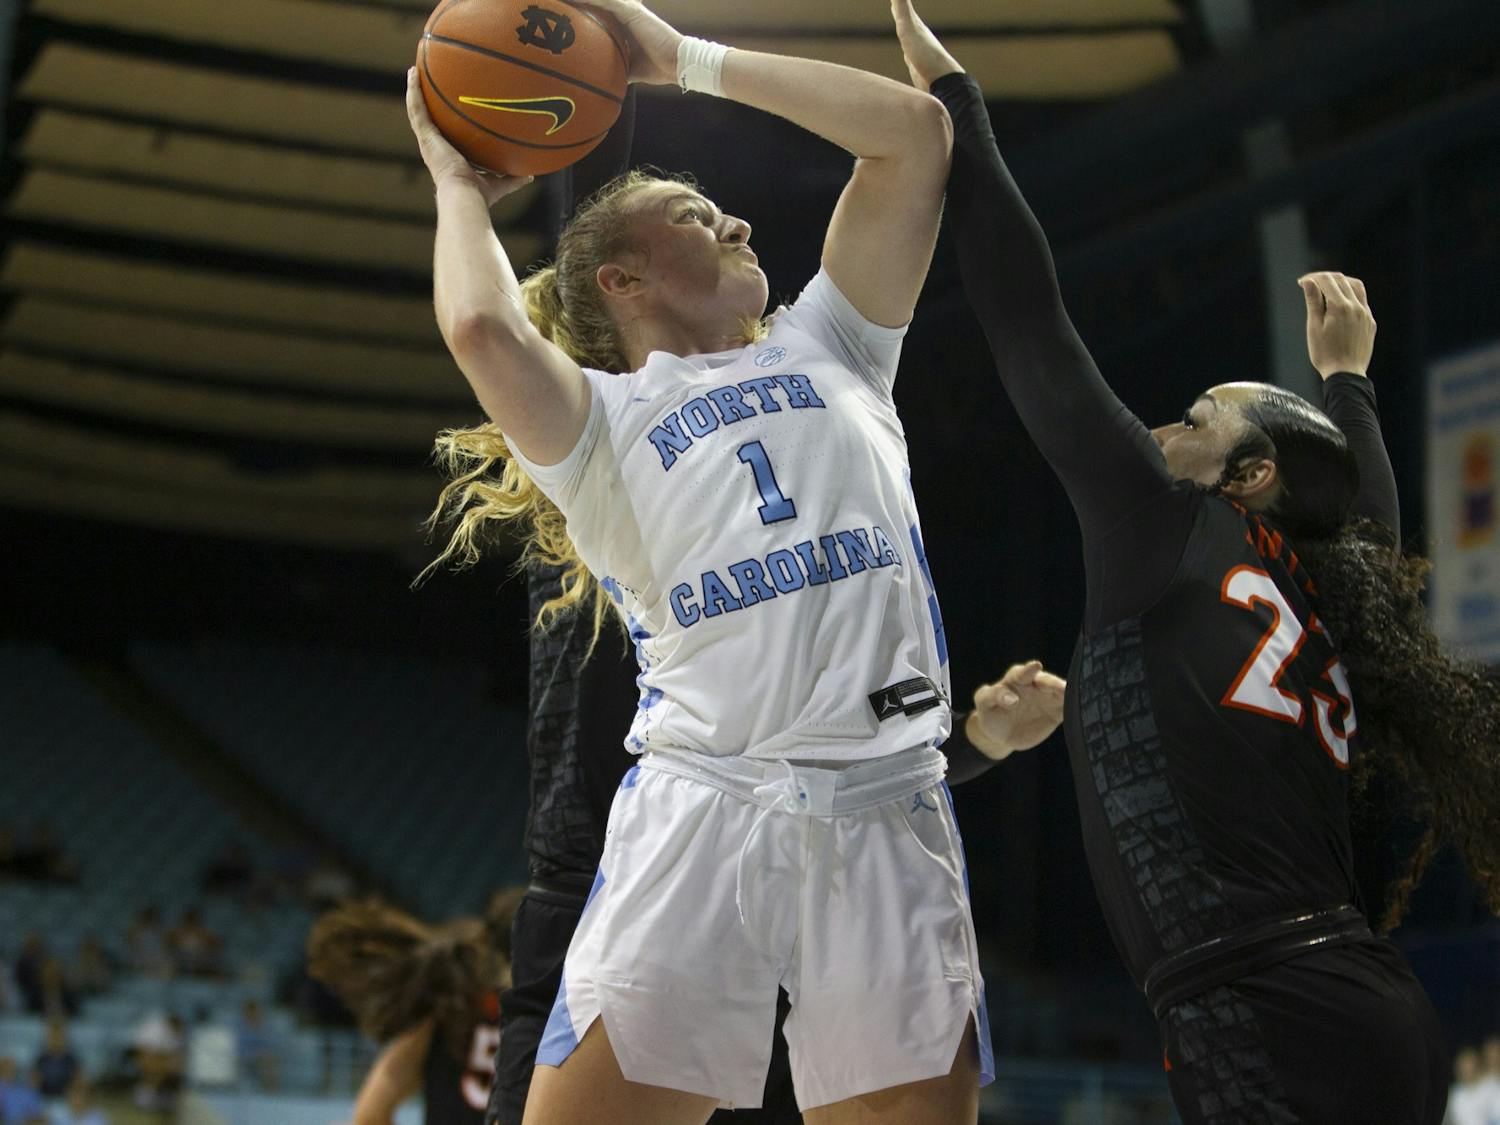 Junior forward/guard Alyssa Ustby (1) goes up for a layup during the women's basketball game against Virginia Tech on Thursday, Feb. 23, 2023, at Carmichael Arena. VT beat UNC 61-59.